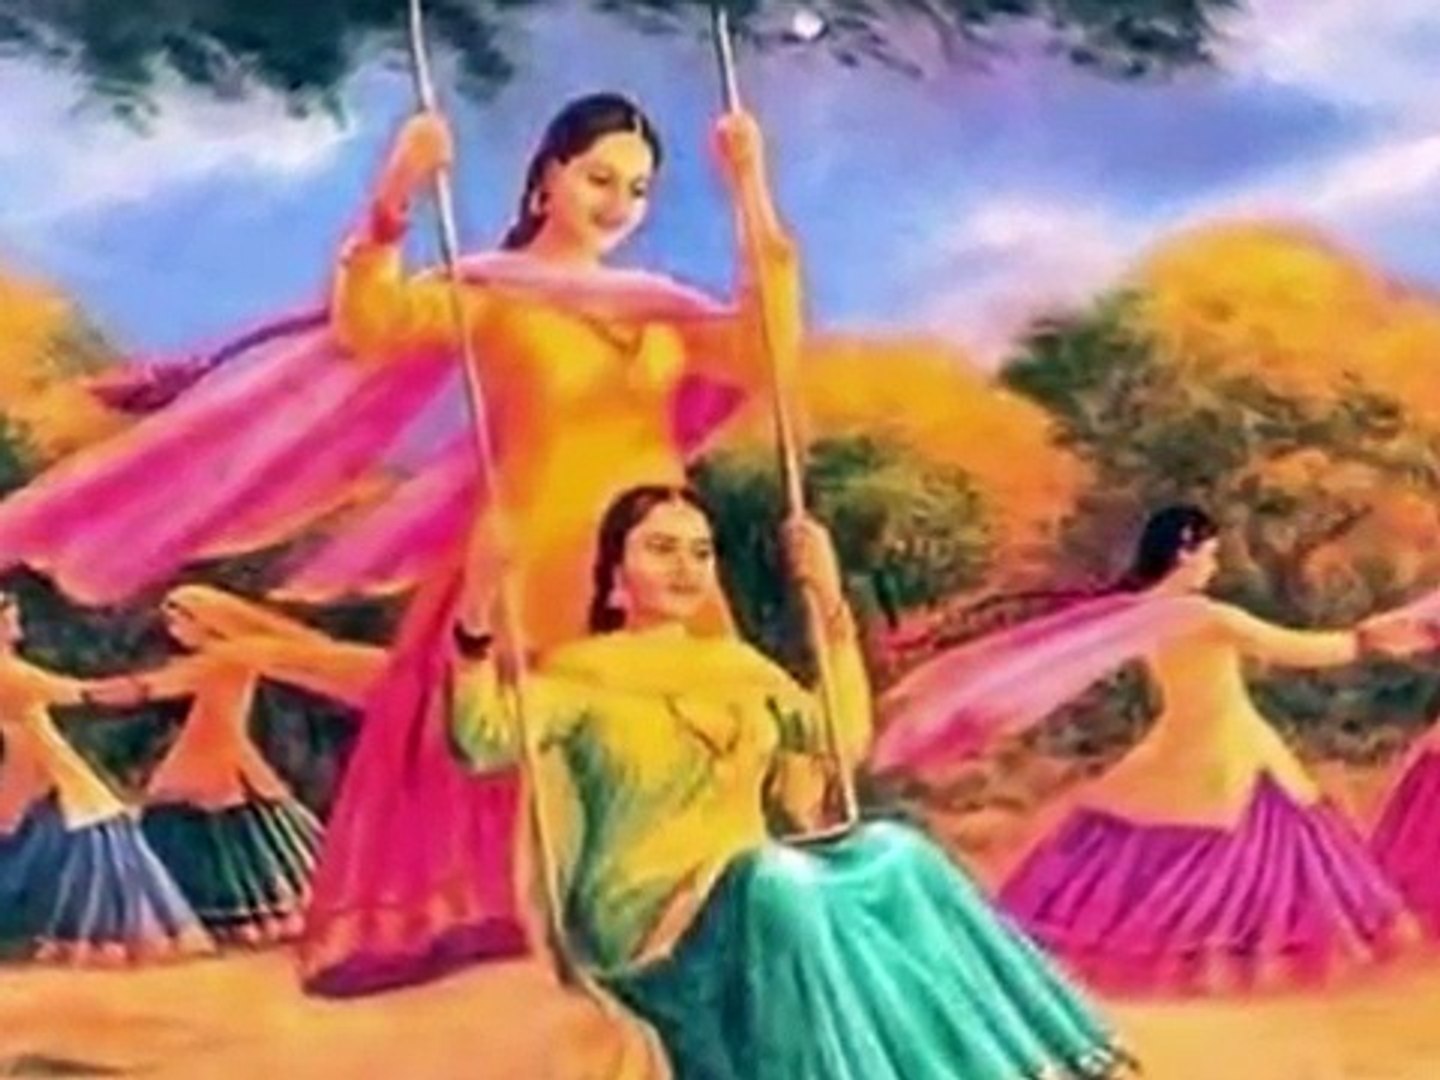 Traditional punjabi culture a festival special - video Dailymotion